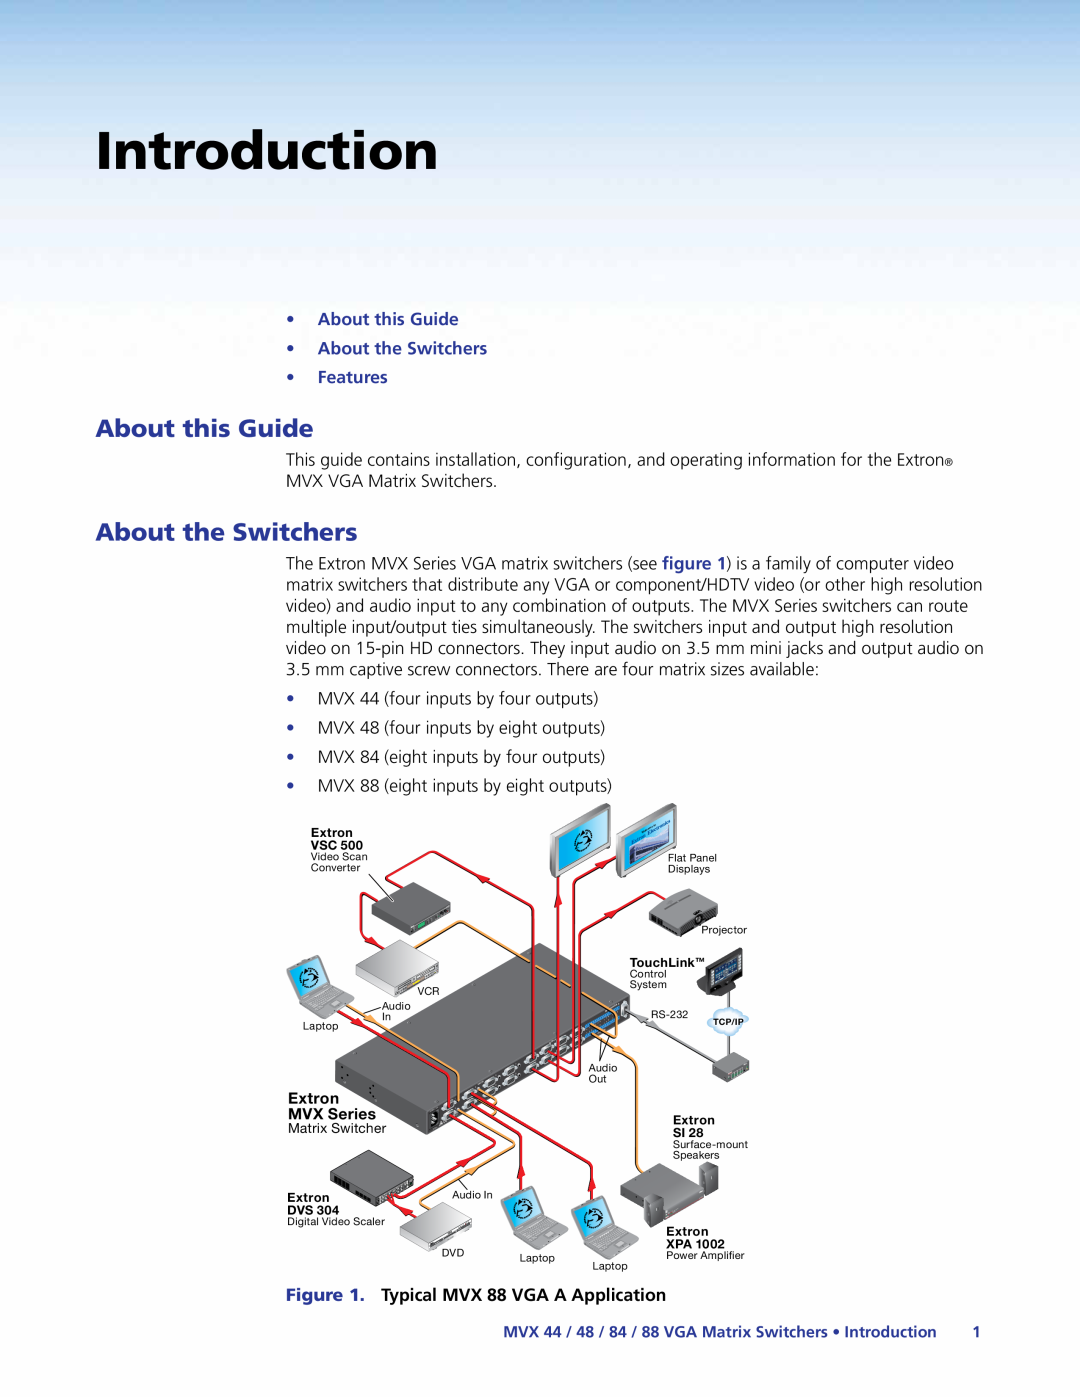 Extron electronic 48 Introduction, About this Guide About the Switchers Features, Typical MVX 88 VGA A Application 